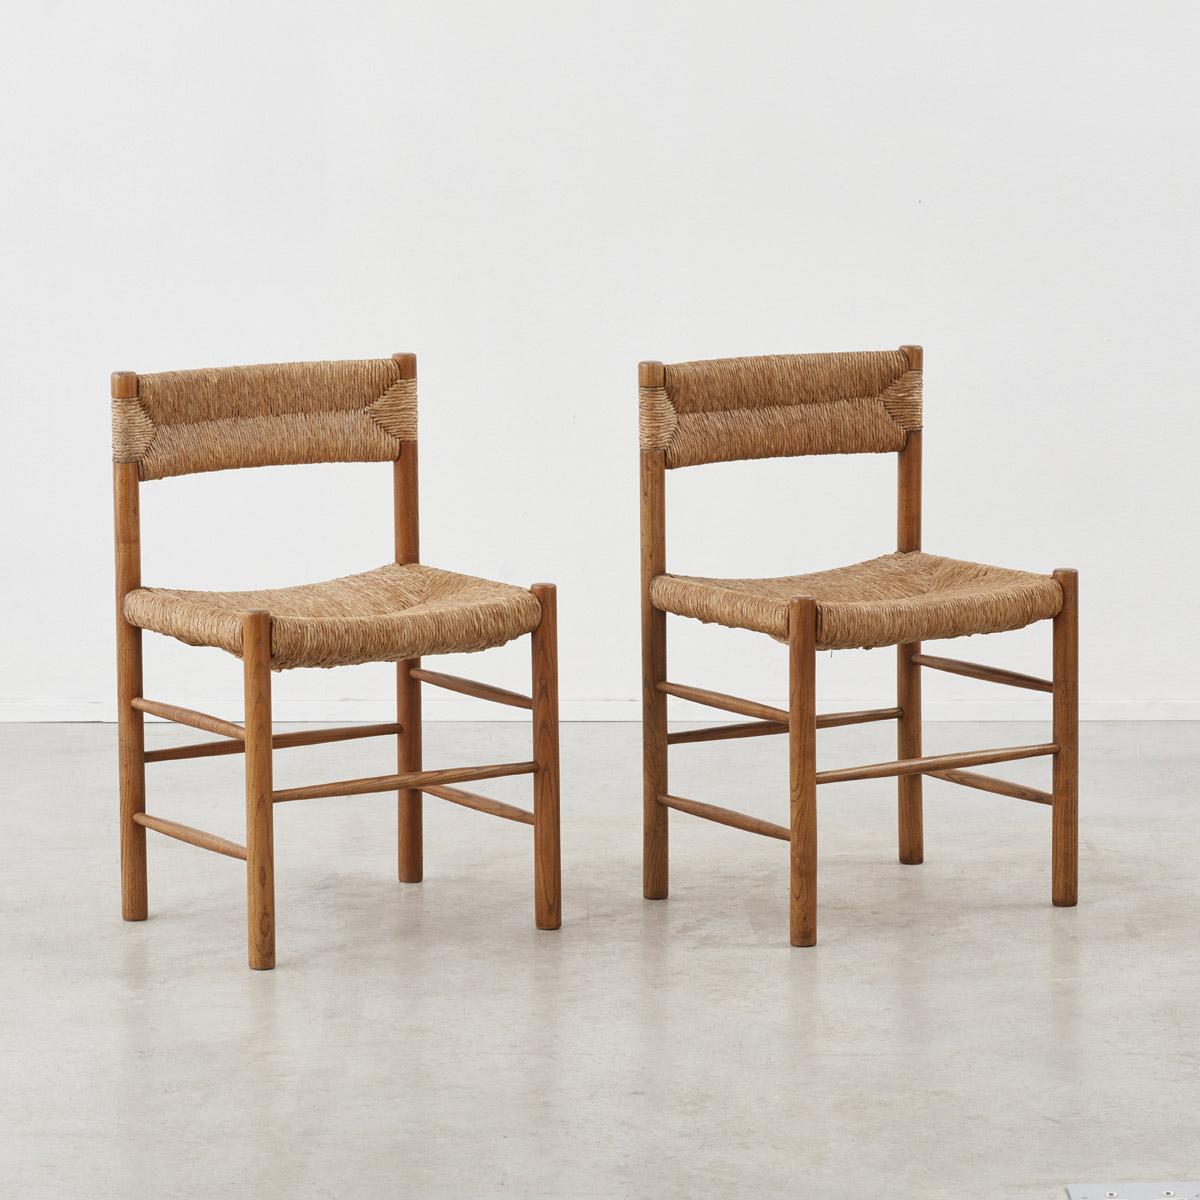 Modern Set of Four Charlotte Perriand Dordogne Chairs for Robert Sentou, France c1950 For Sale